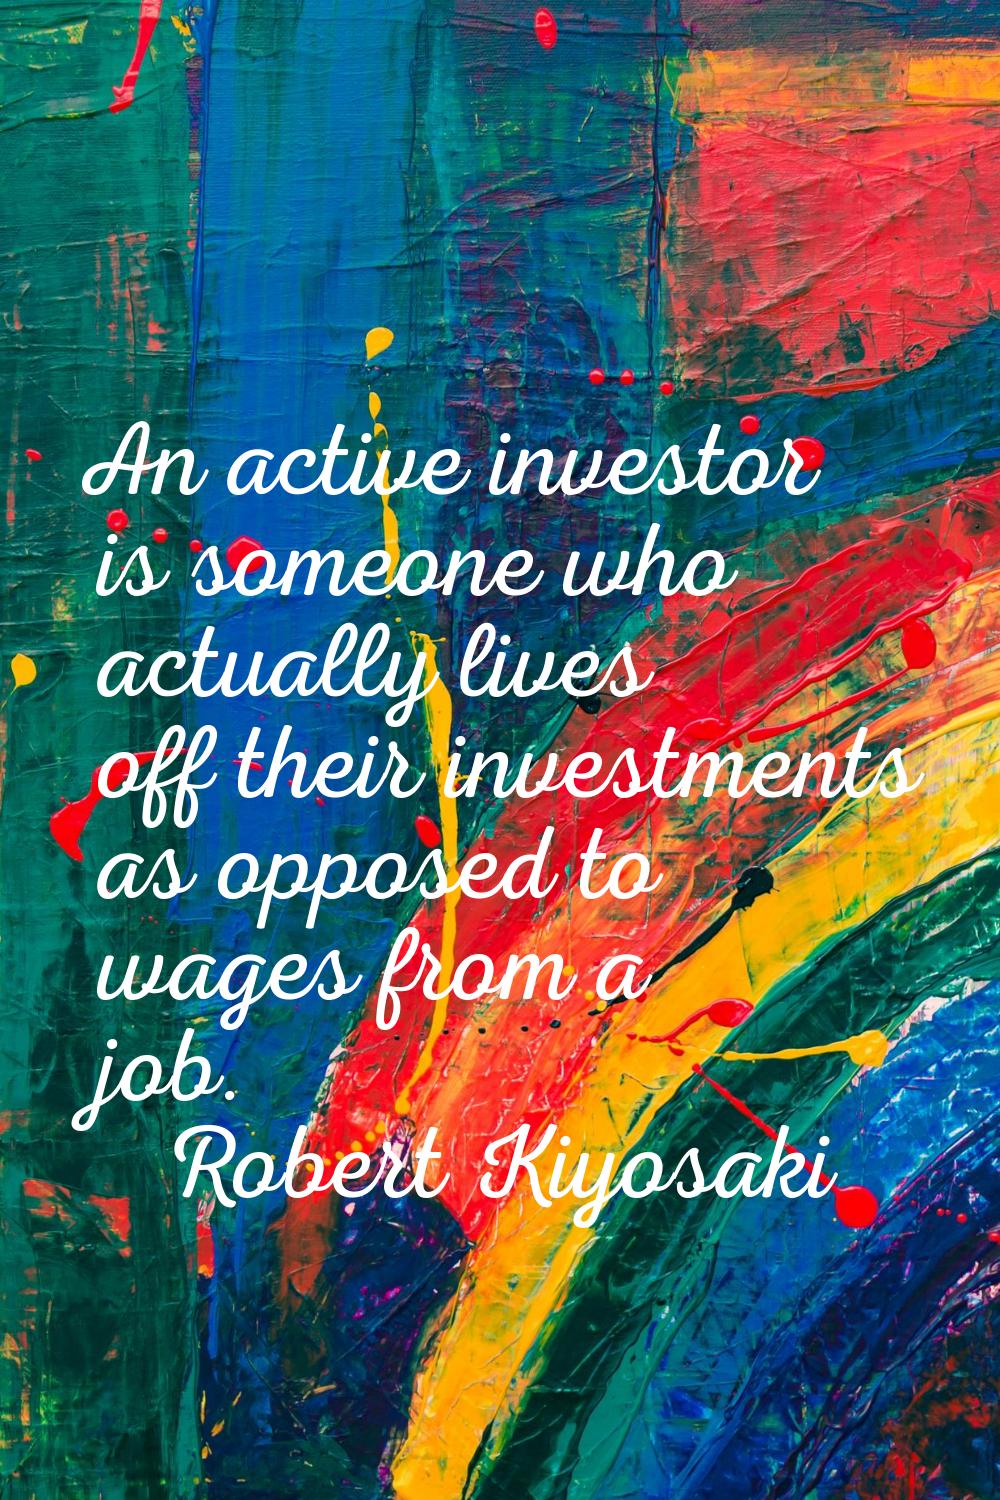 An active investor is someone who actually lives off their investments as opposed to wages from a j